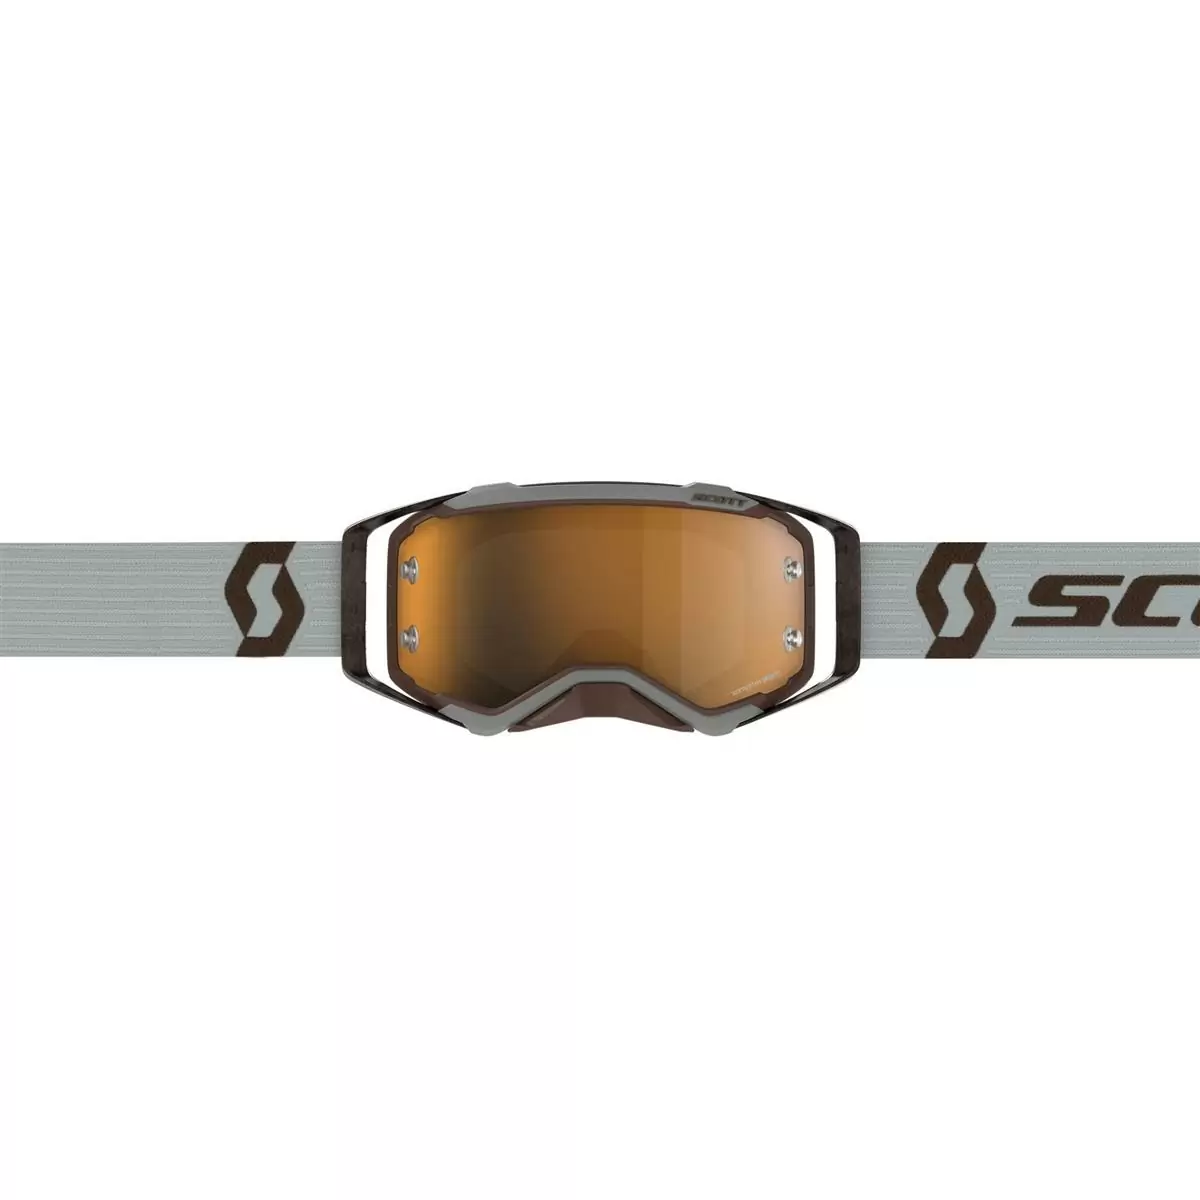 Prospect Goggle Grey/Brown Gold Chrome Works Linse #1